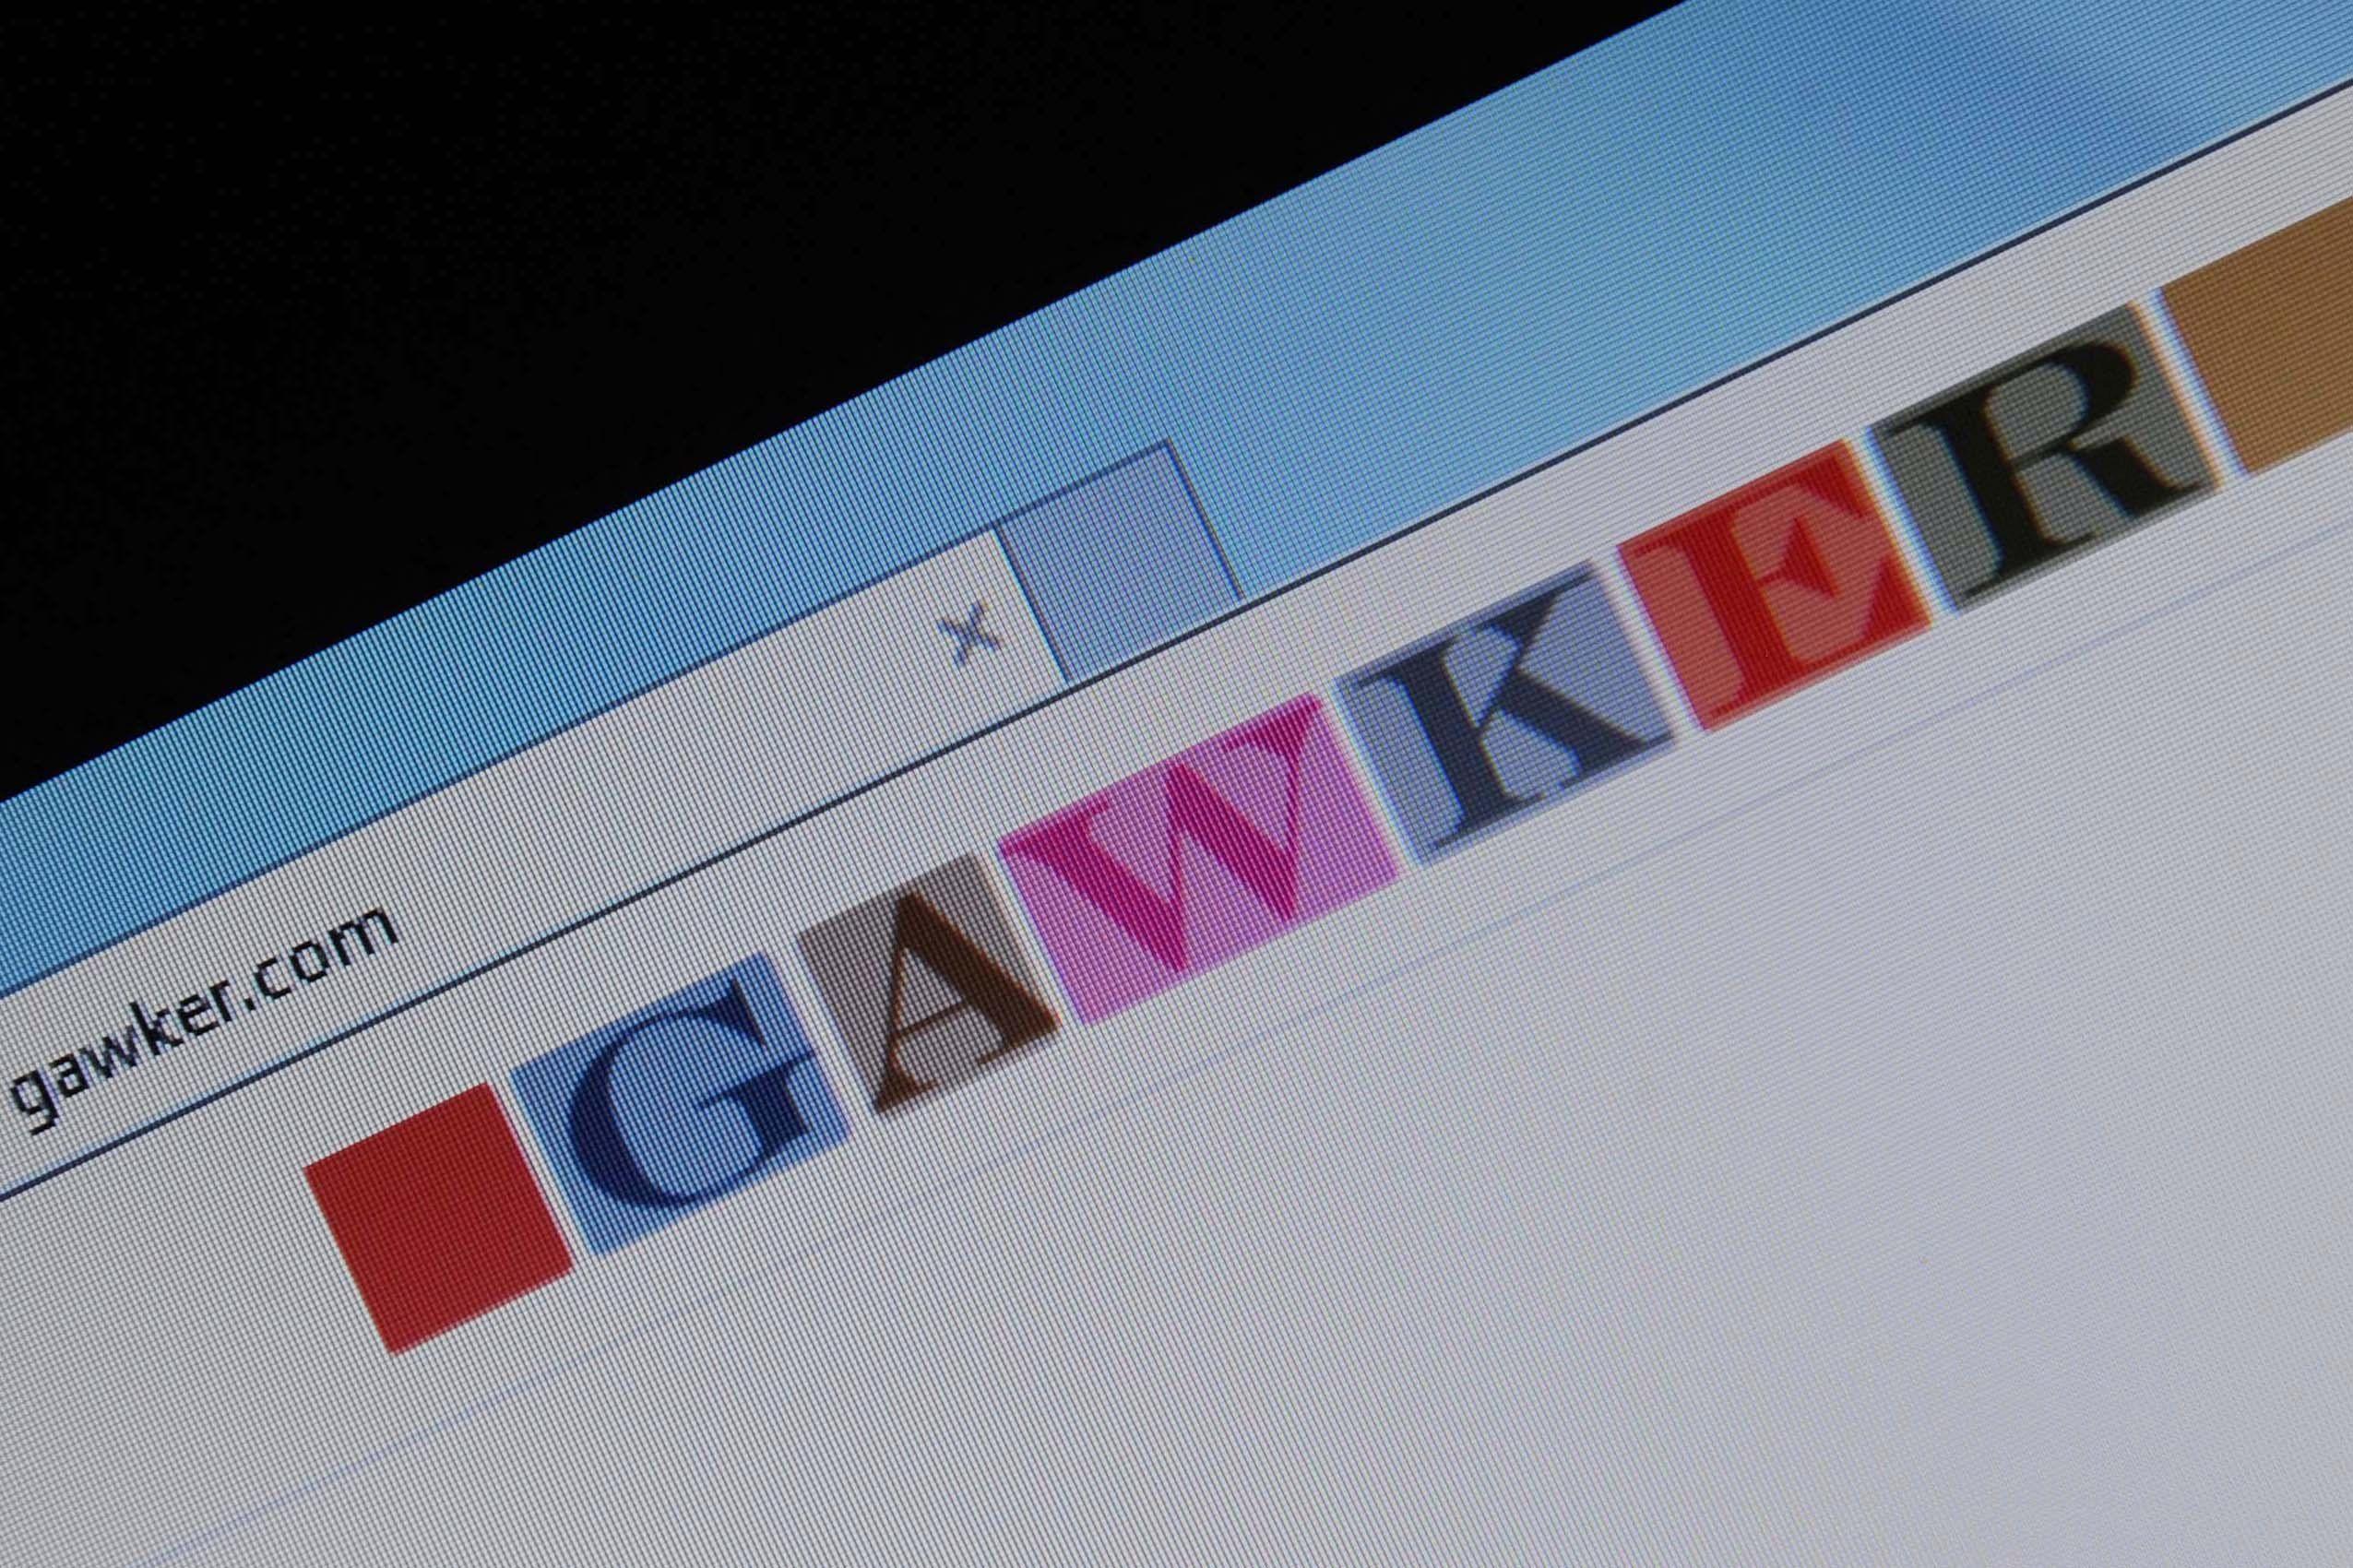 Gawker Logo - Former Players' Tribune editor tapped to head Gawker relaunch